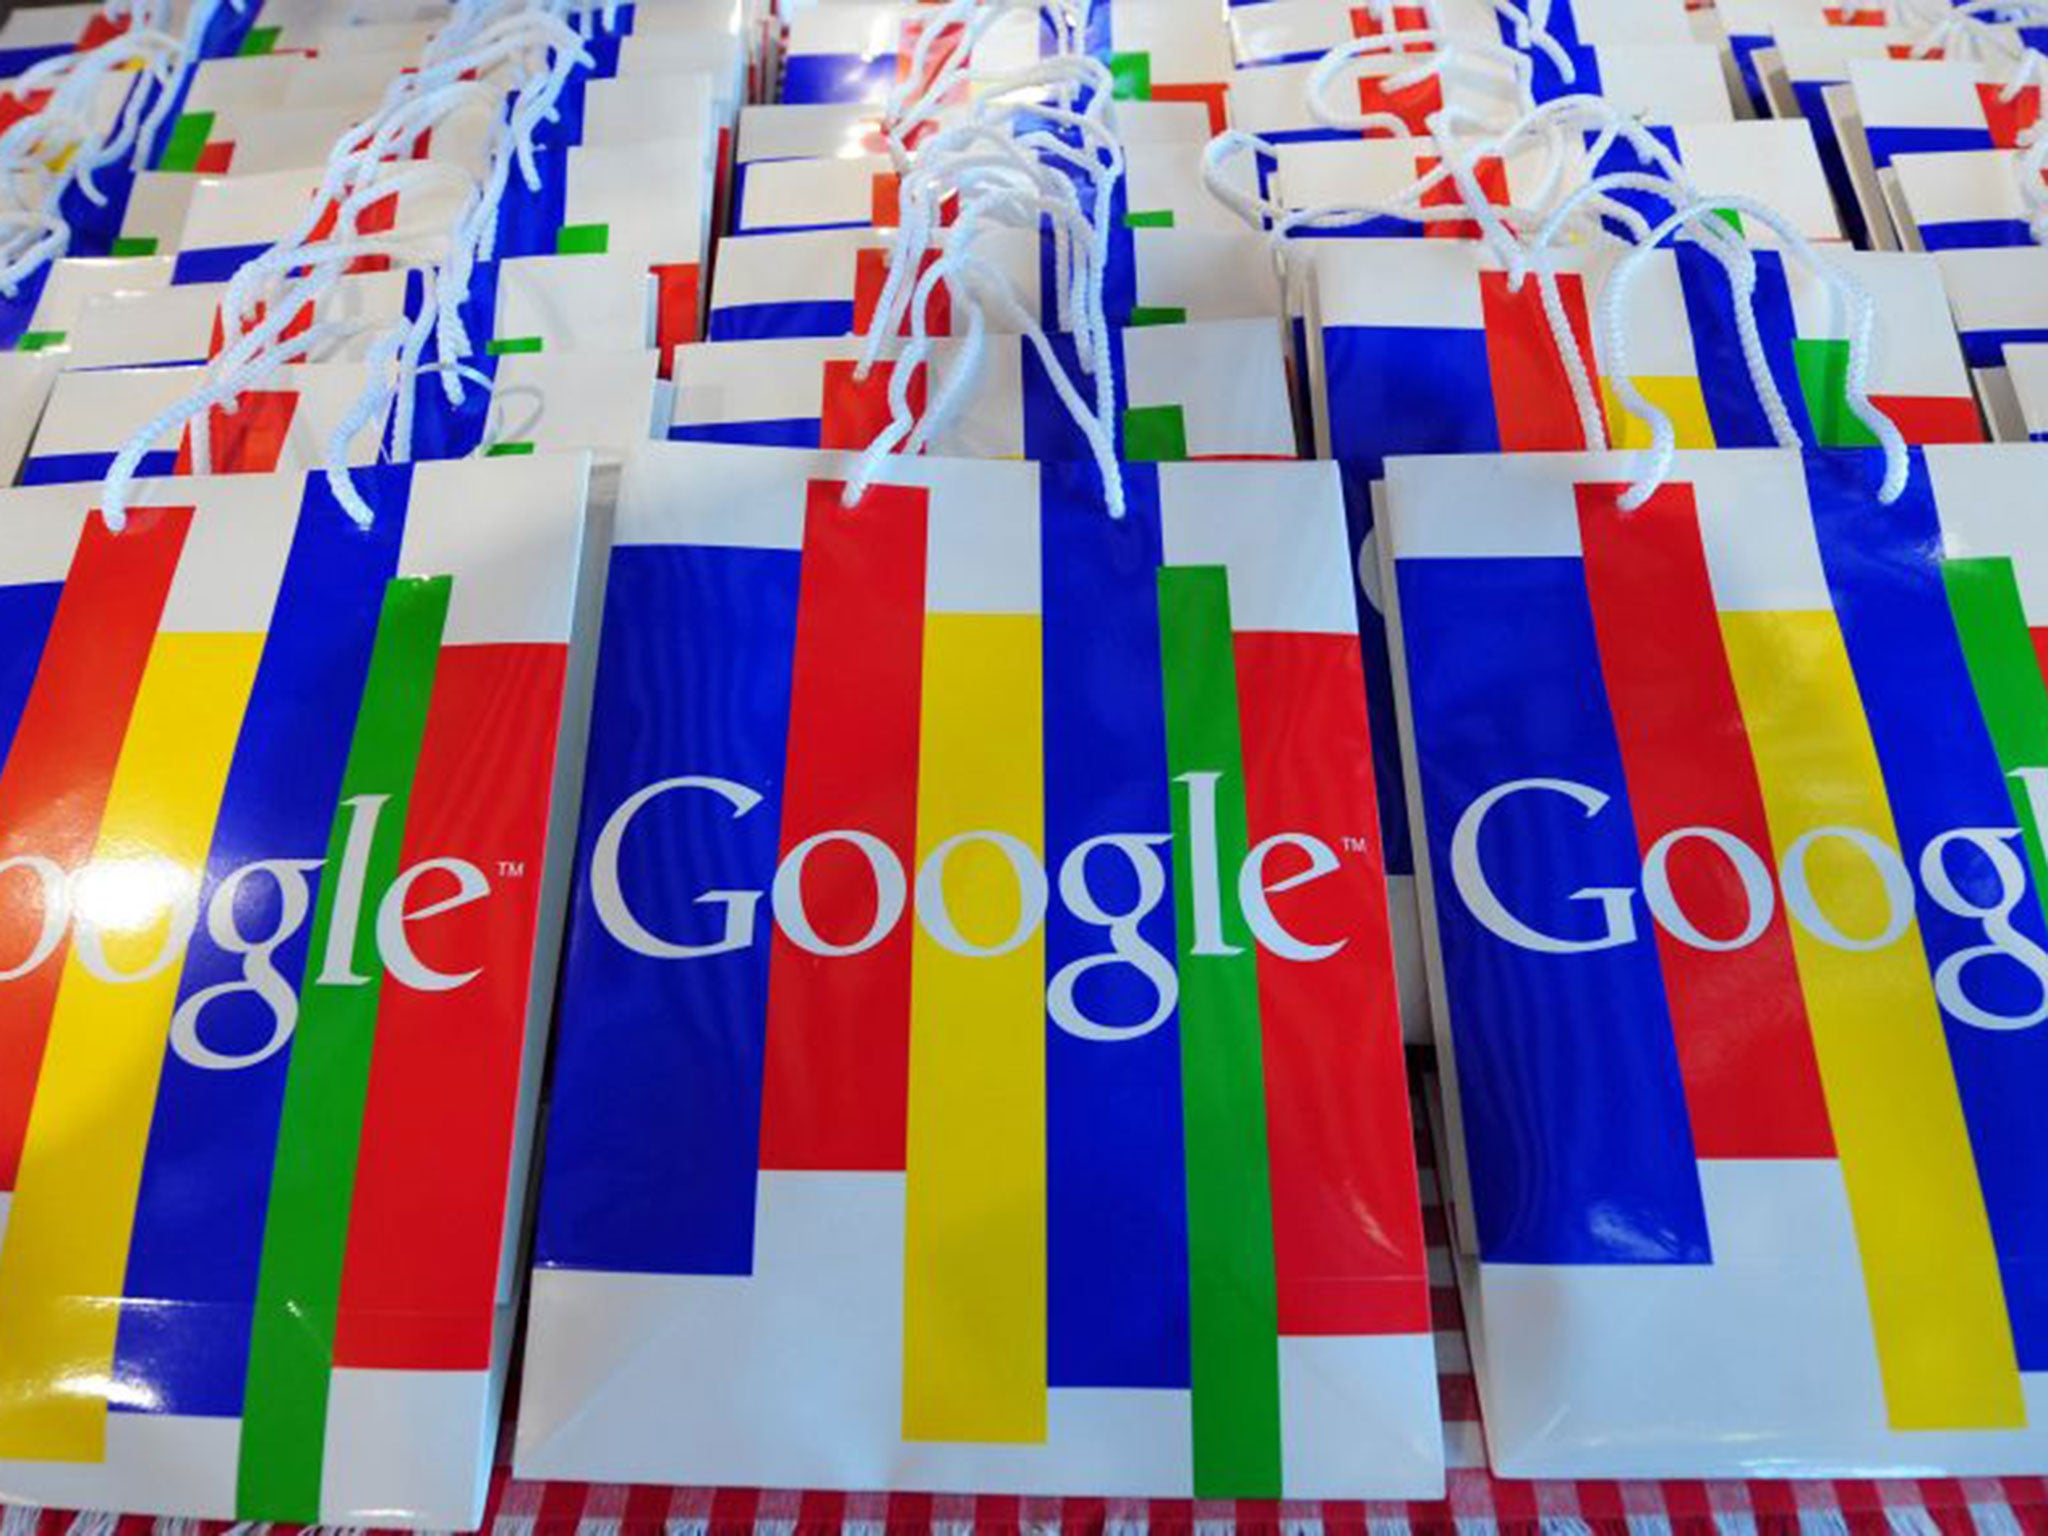 Google’s distinctive logo has become commonplace all over Europe